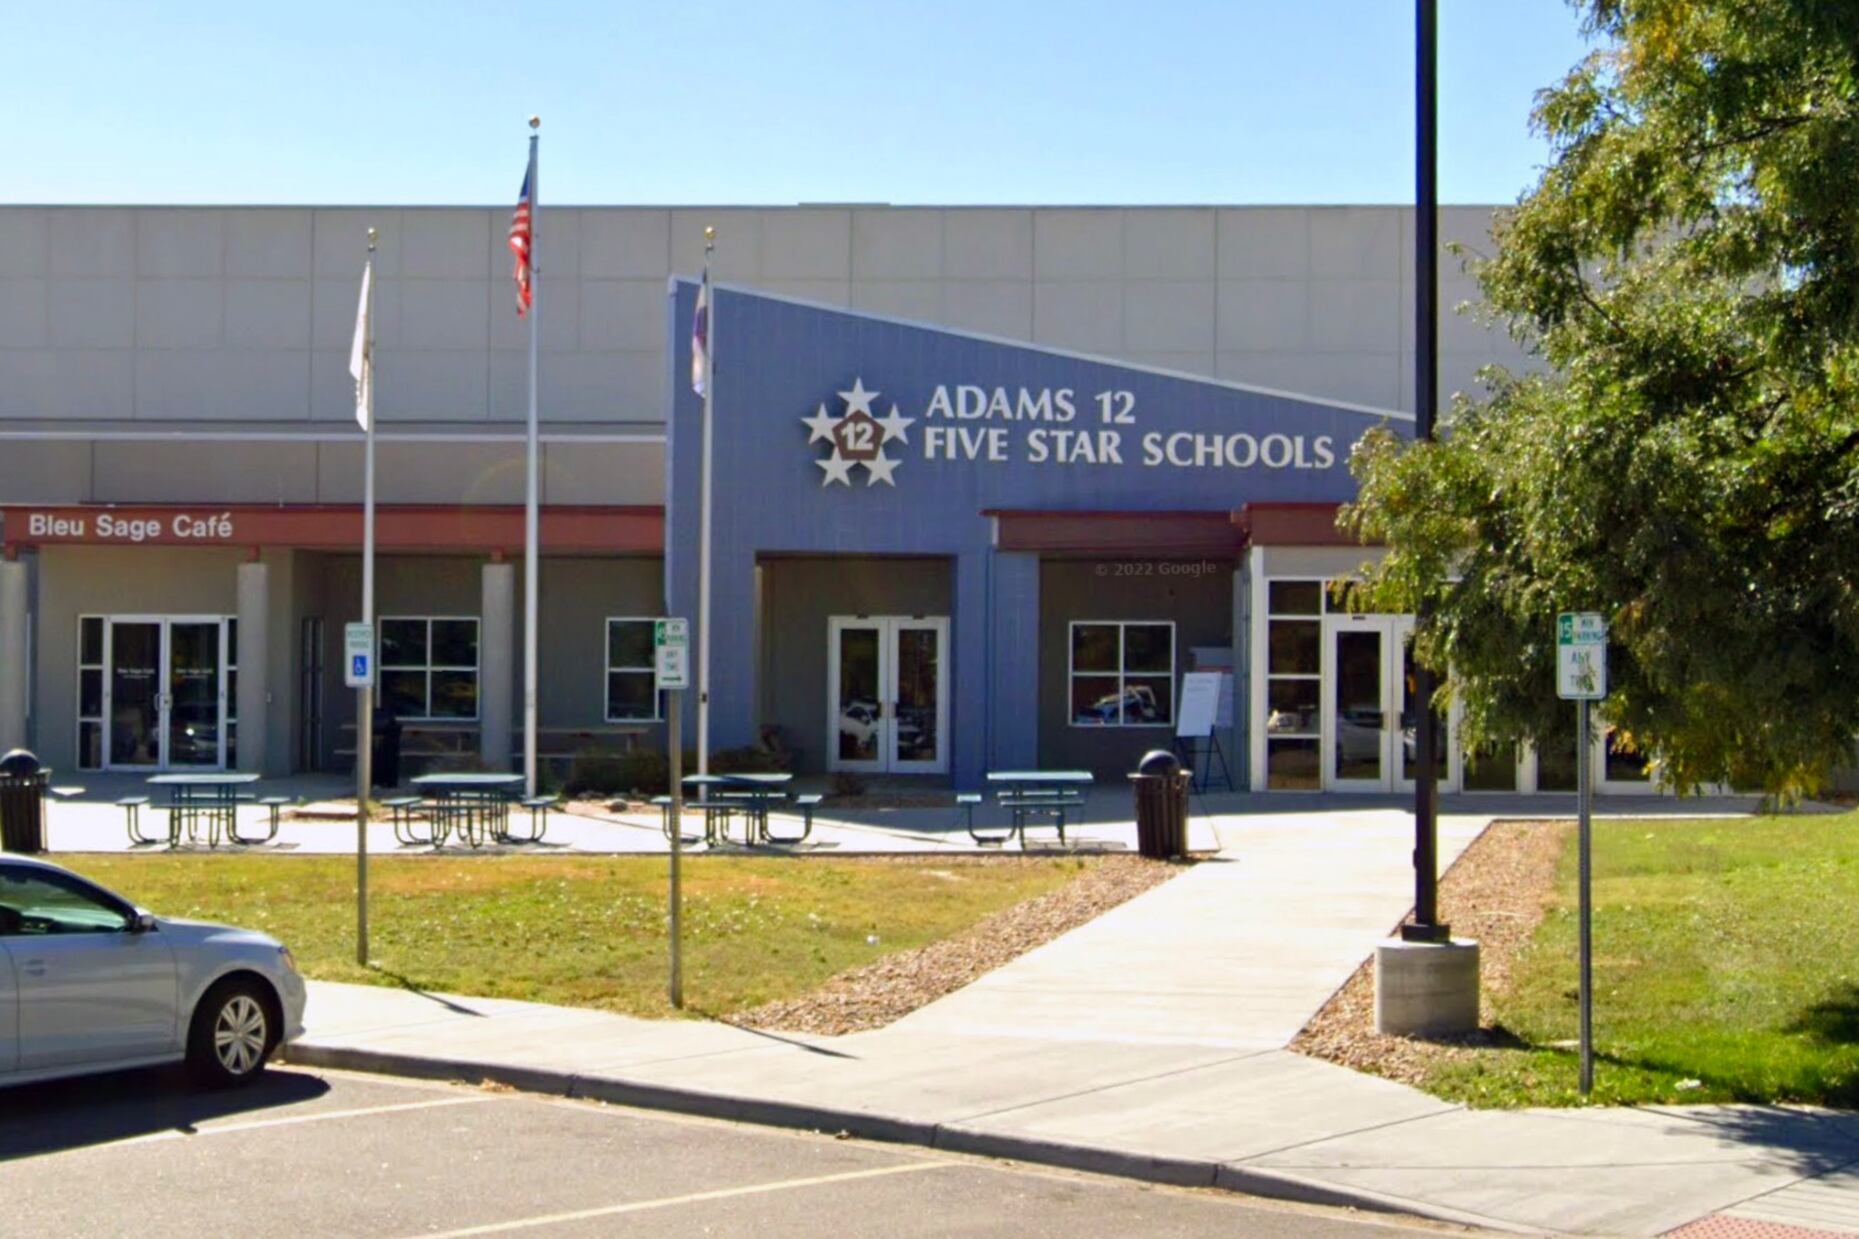 Photo shows Adams 12 Five Star Schools district offices in Thornton. The blue entryway has a sharp angle with a large sign with the district name.